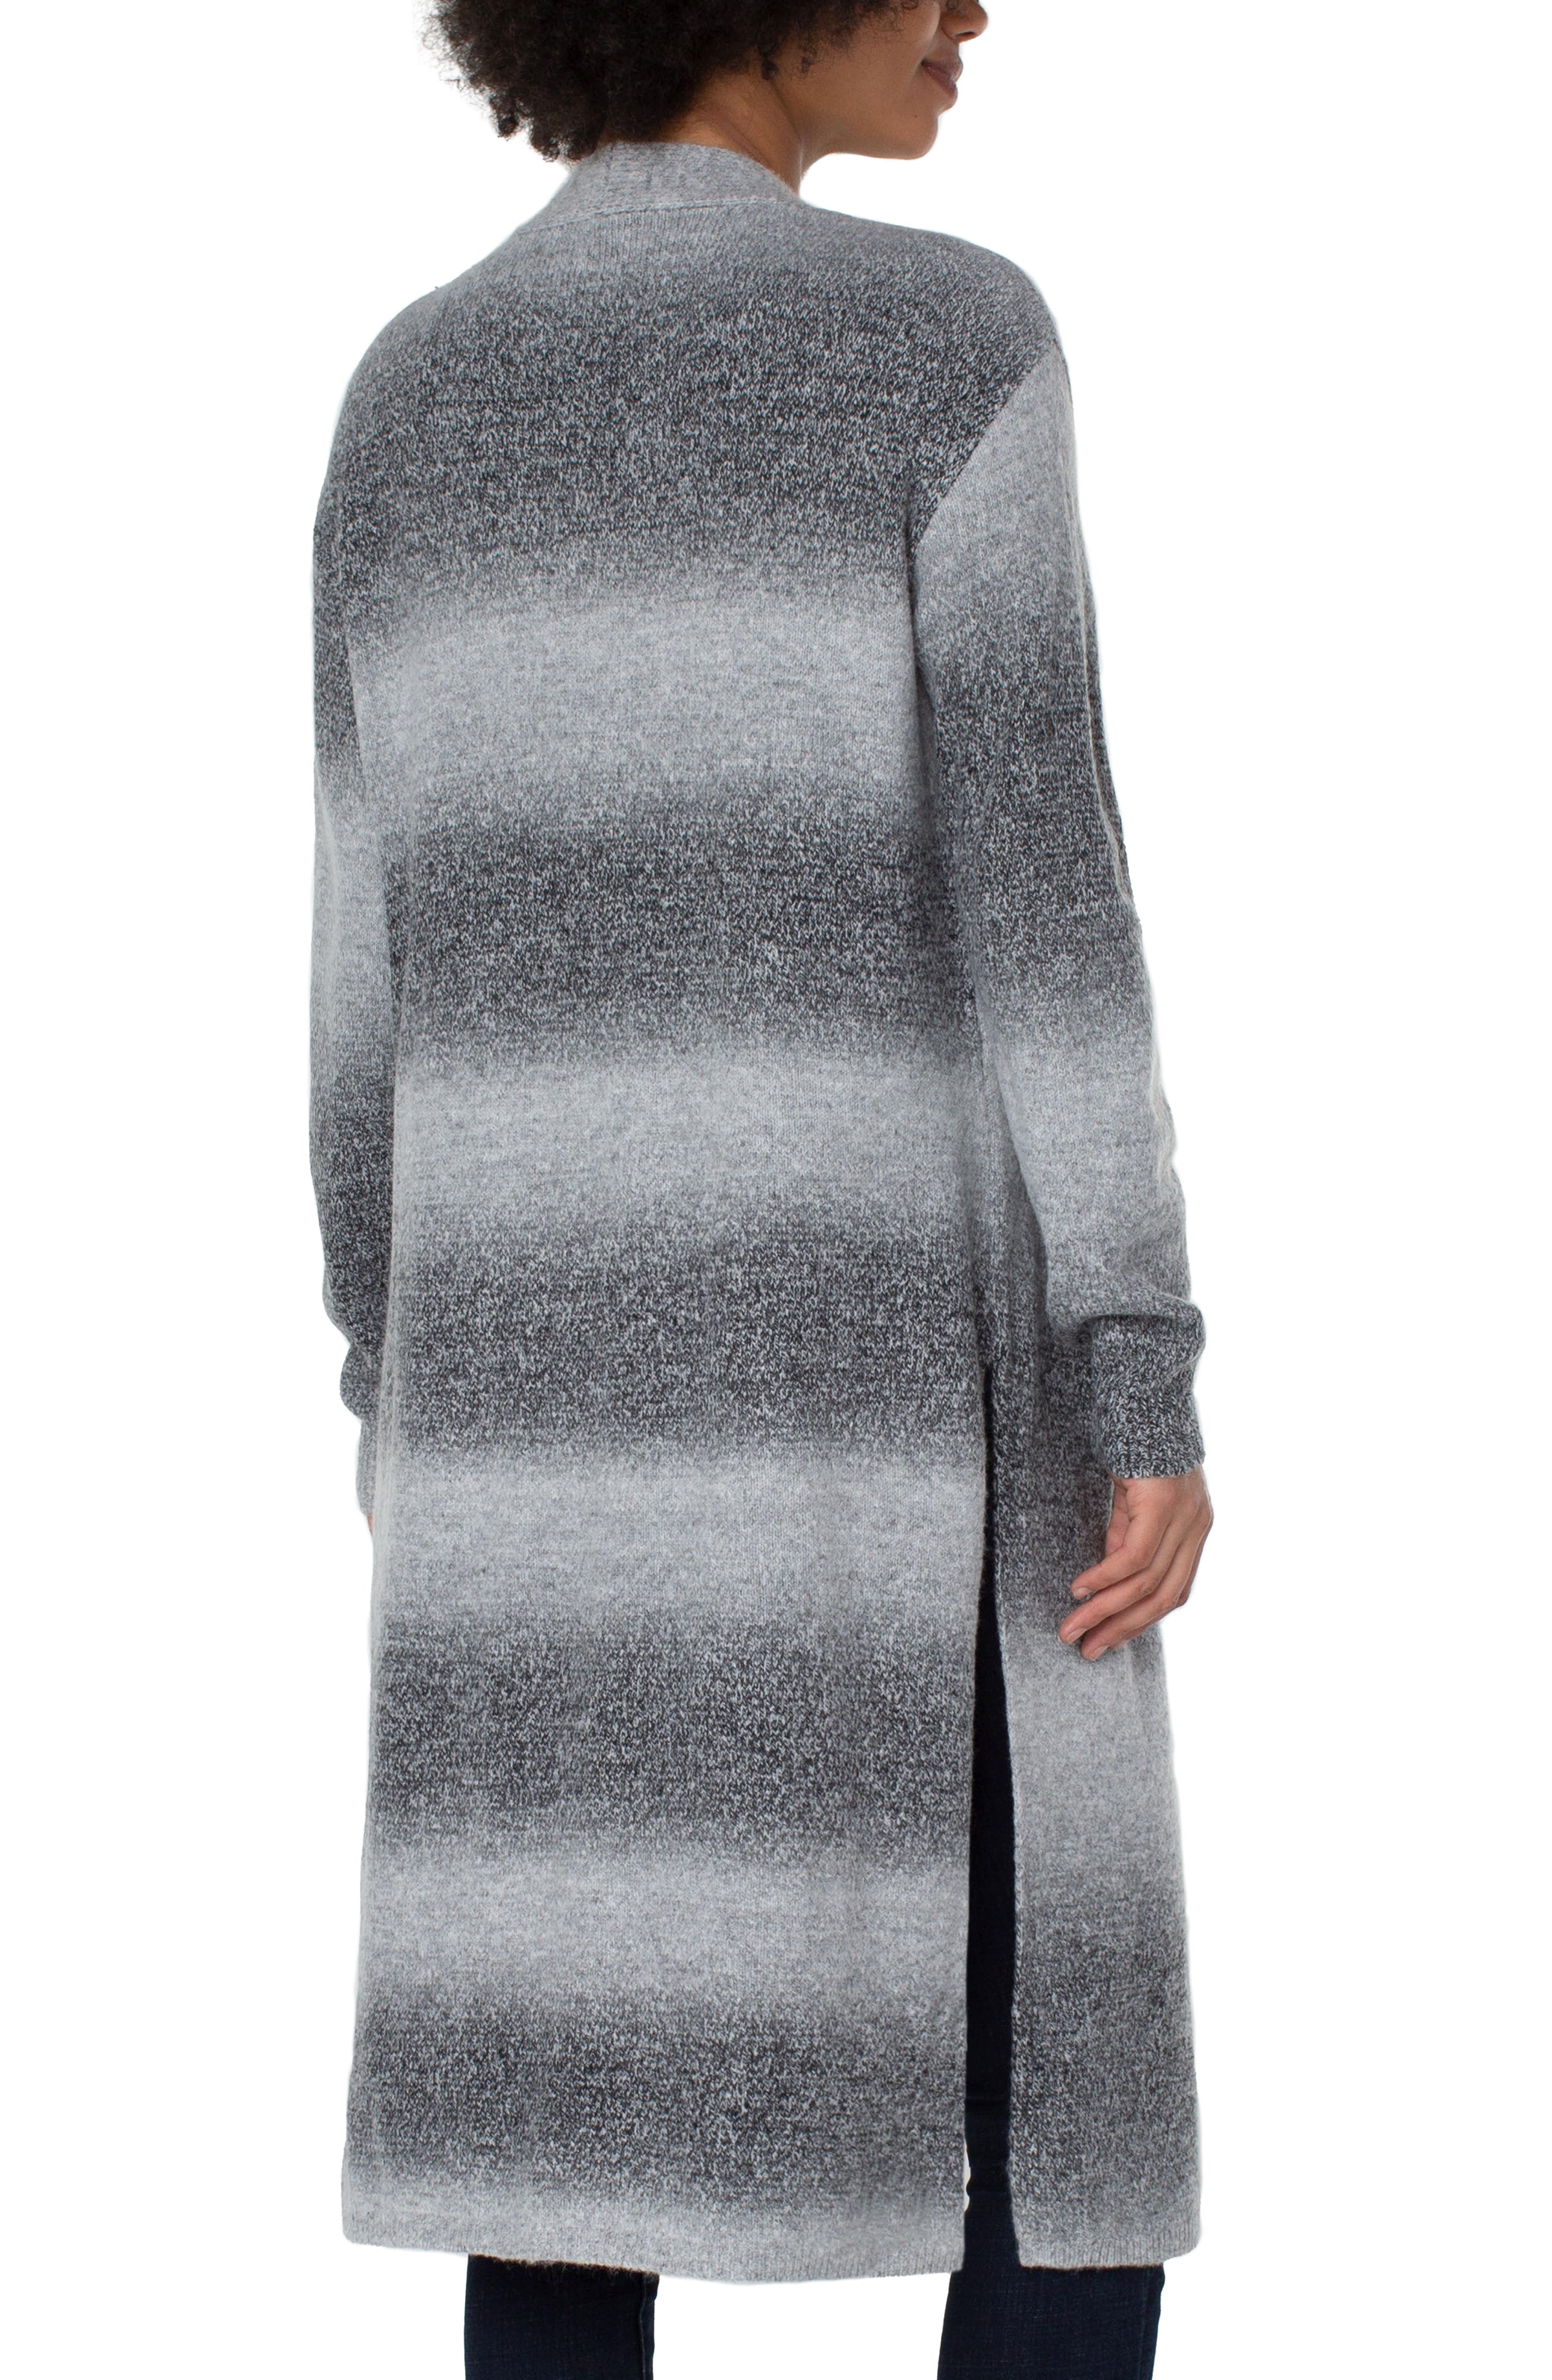 Liverpool Long Sweater - Silverlake Ombré back view